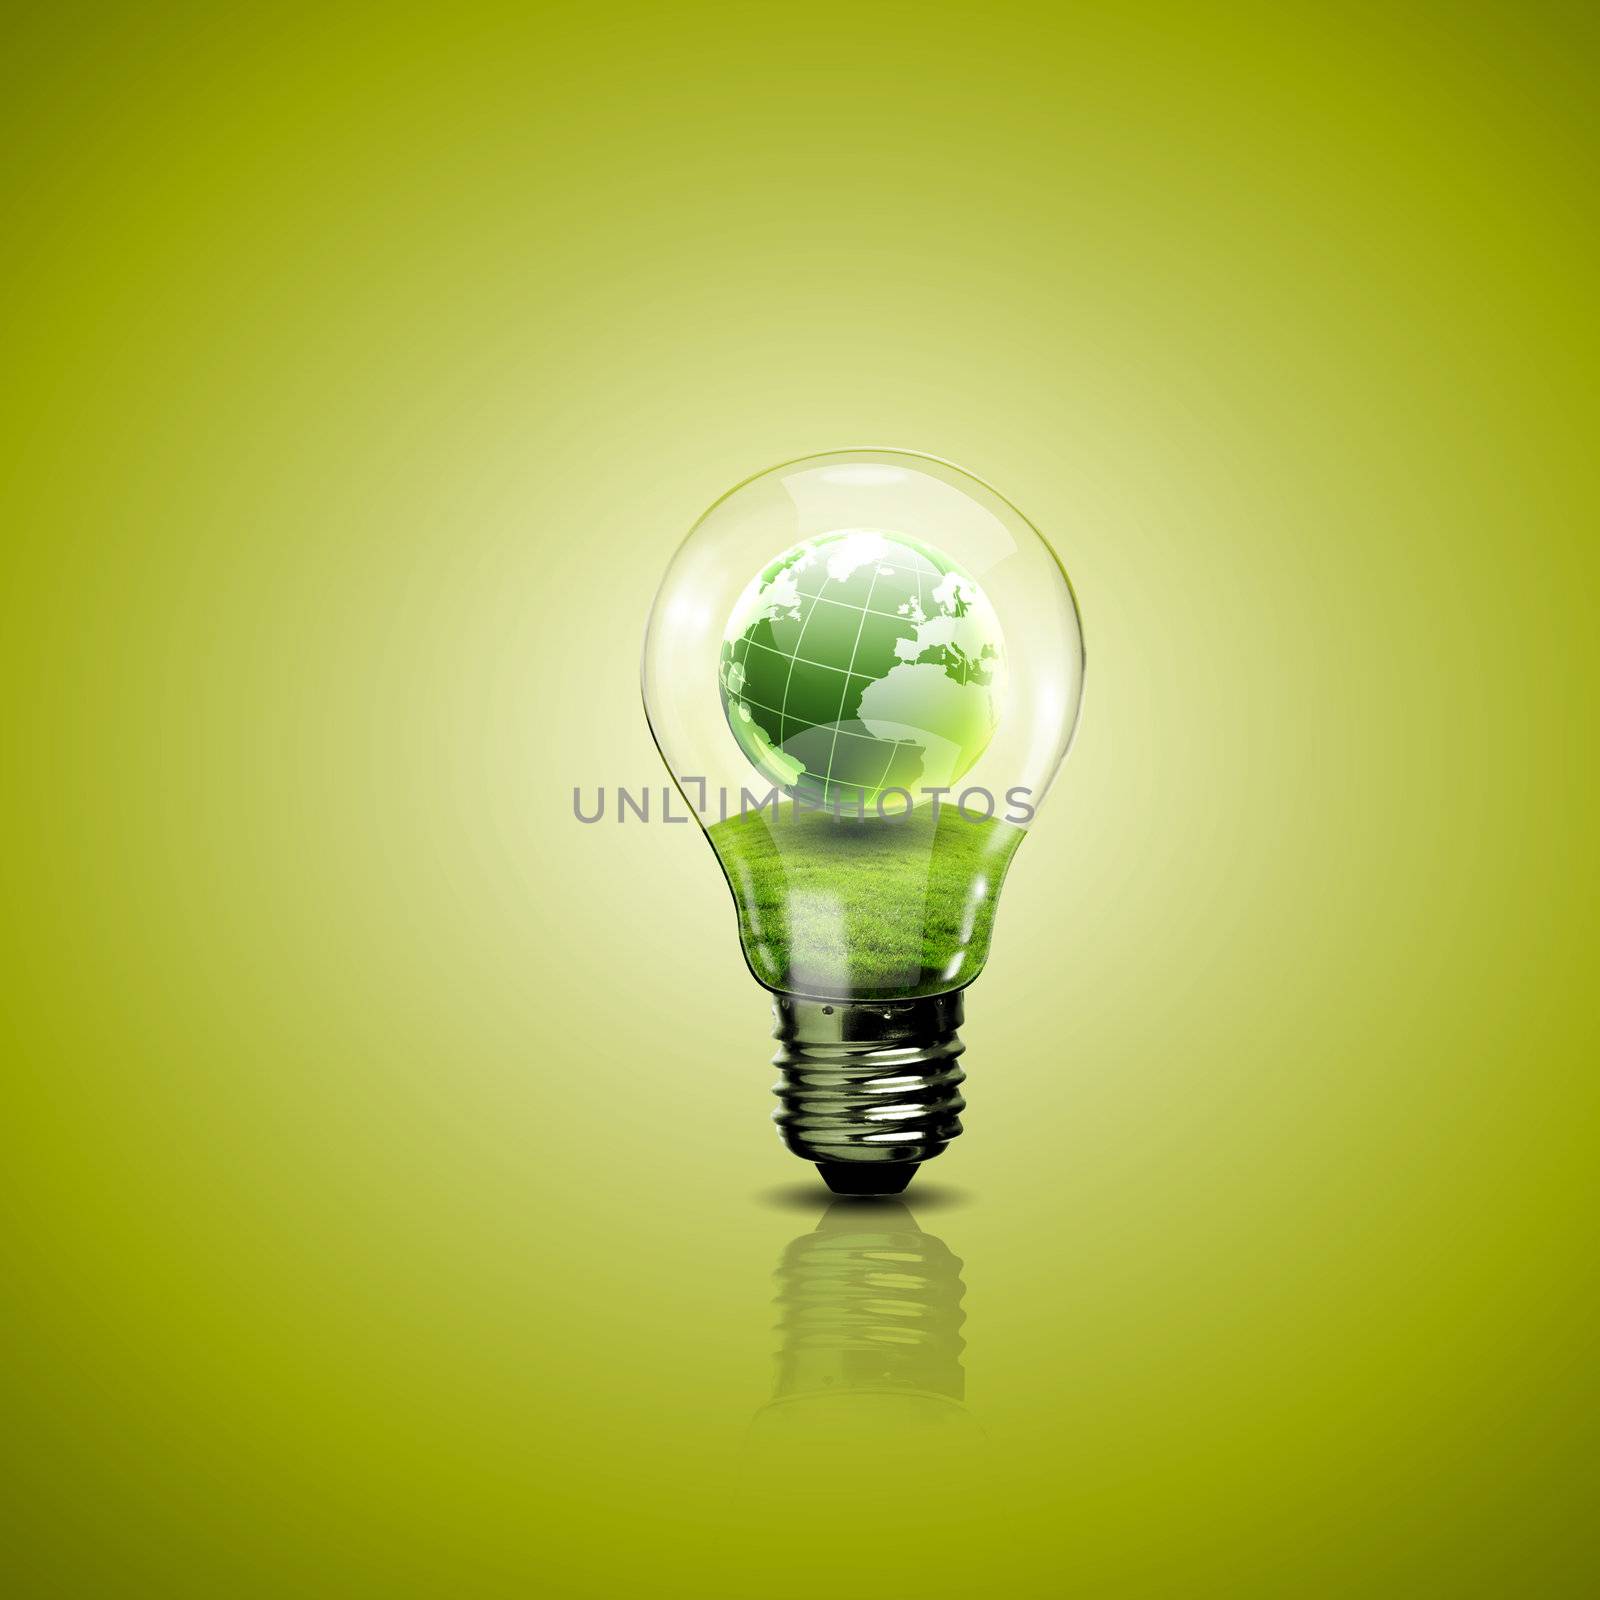 Electric light bulb and a plant inside it by sergey_nivens